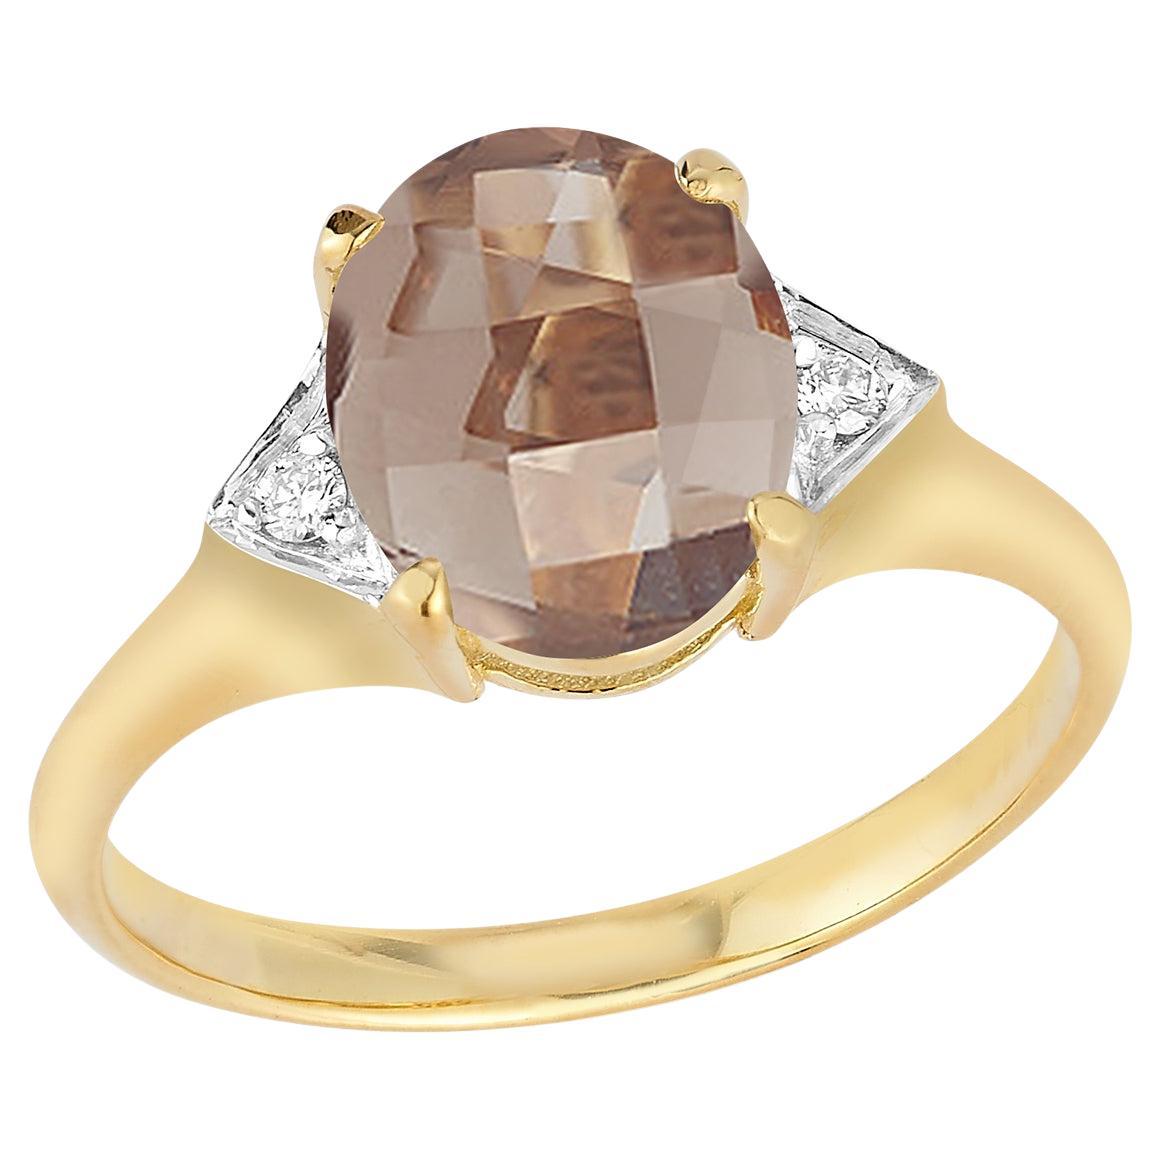 For Sale:  Hand-Crafted 14K Gold 0.05 ct. tw. Diamond & 4.75CT Smokey Topaz Cocktail Ring